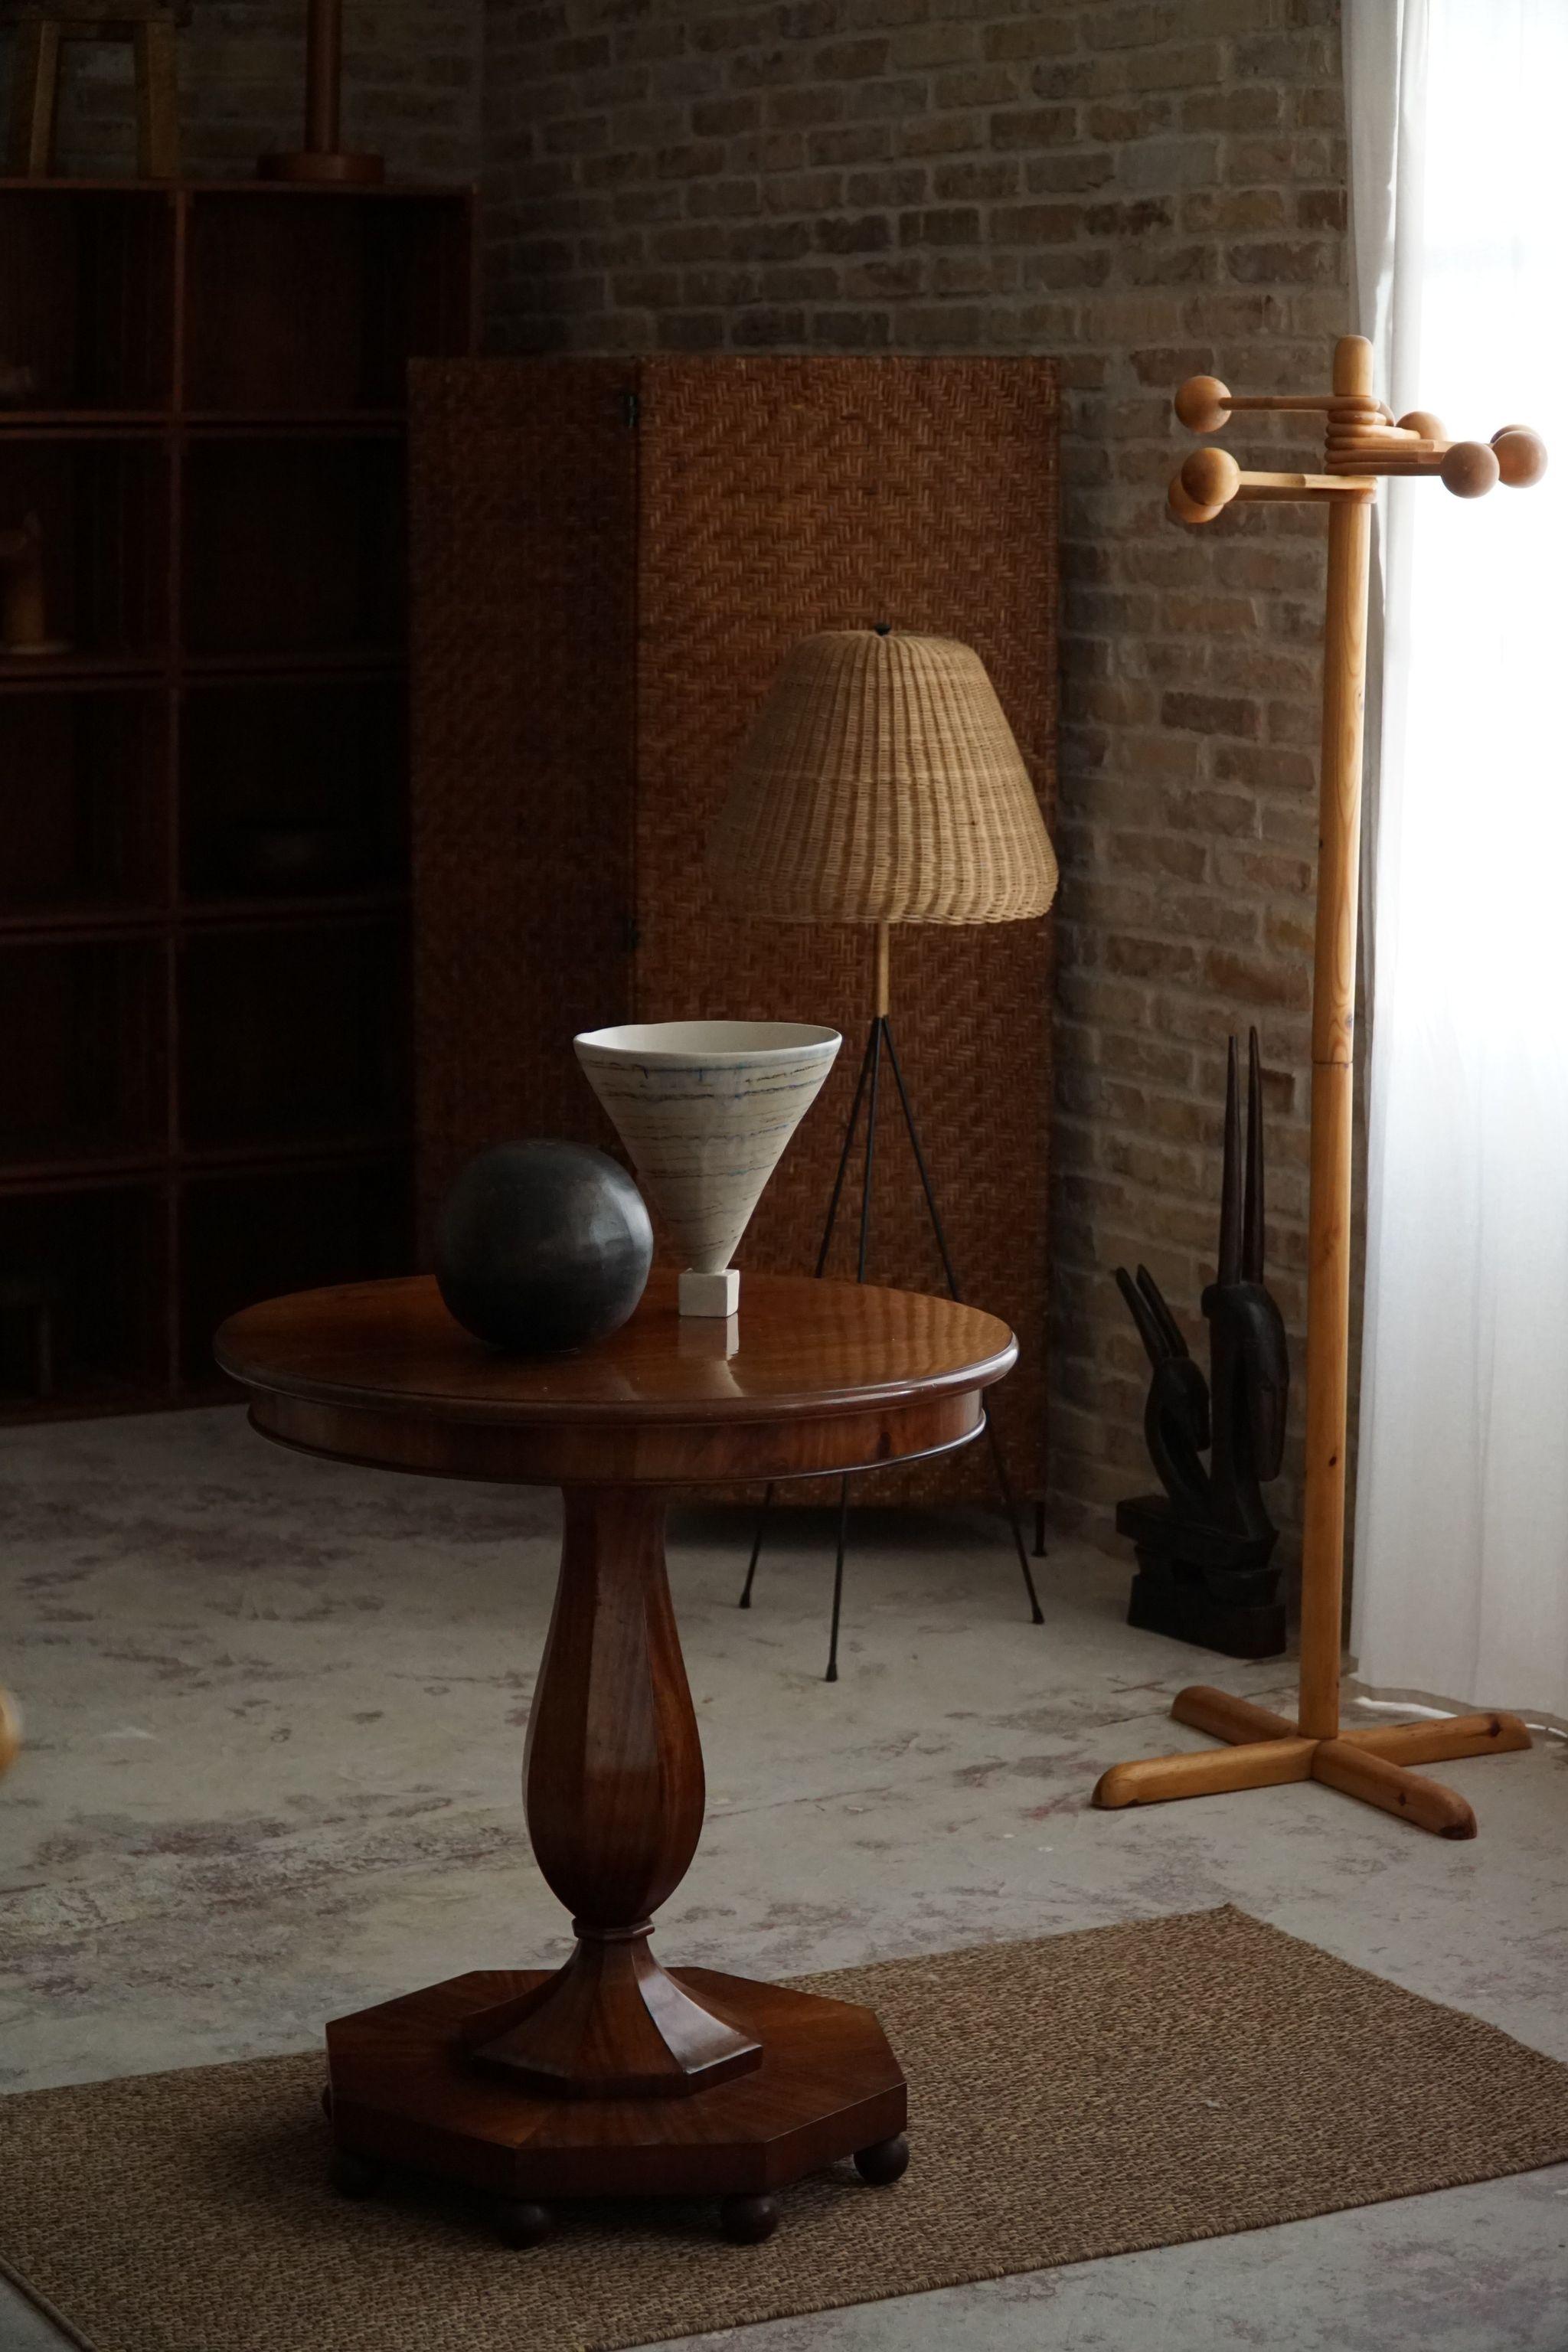 This luxurious round pedestal/side table is a stunning testament to the craftsmanship of a Danish cabinetmaker during the glamorous era of the 1940s. Crafted from walnut, this piece seamlessly marries form and function, embodying the essence of Art